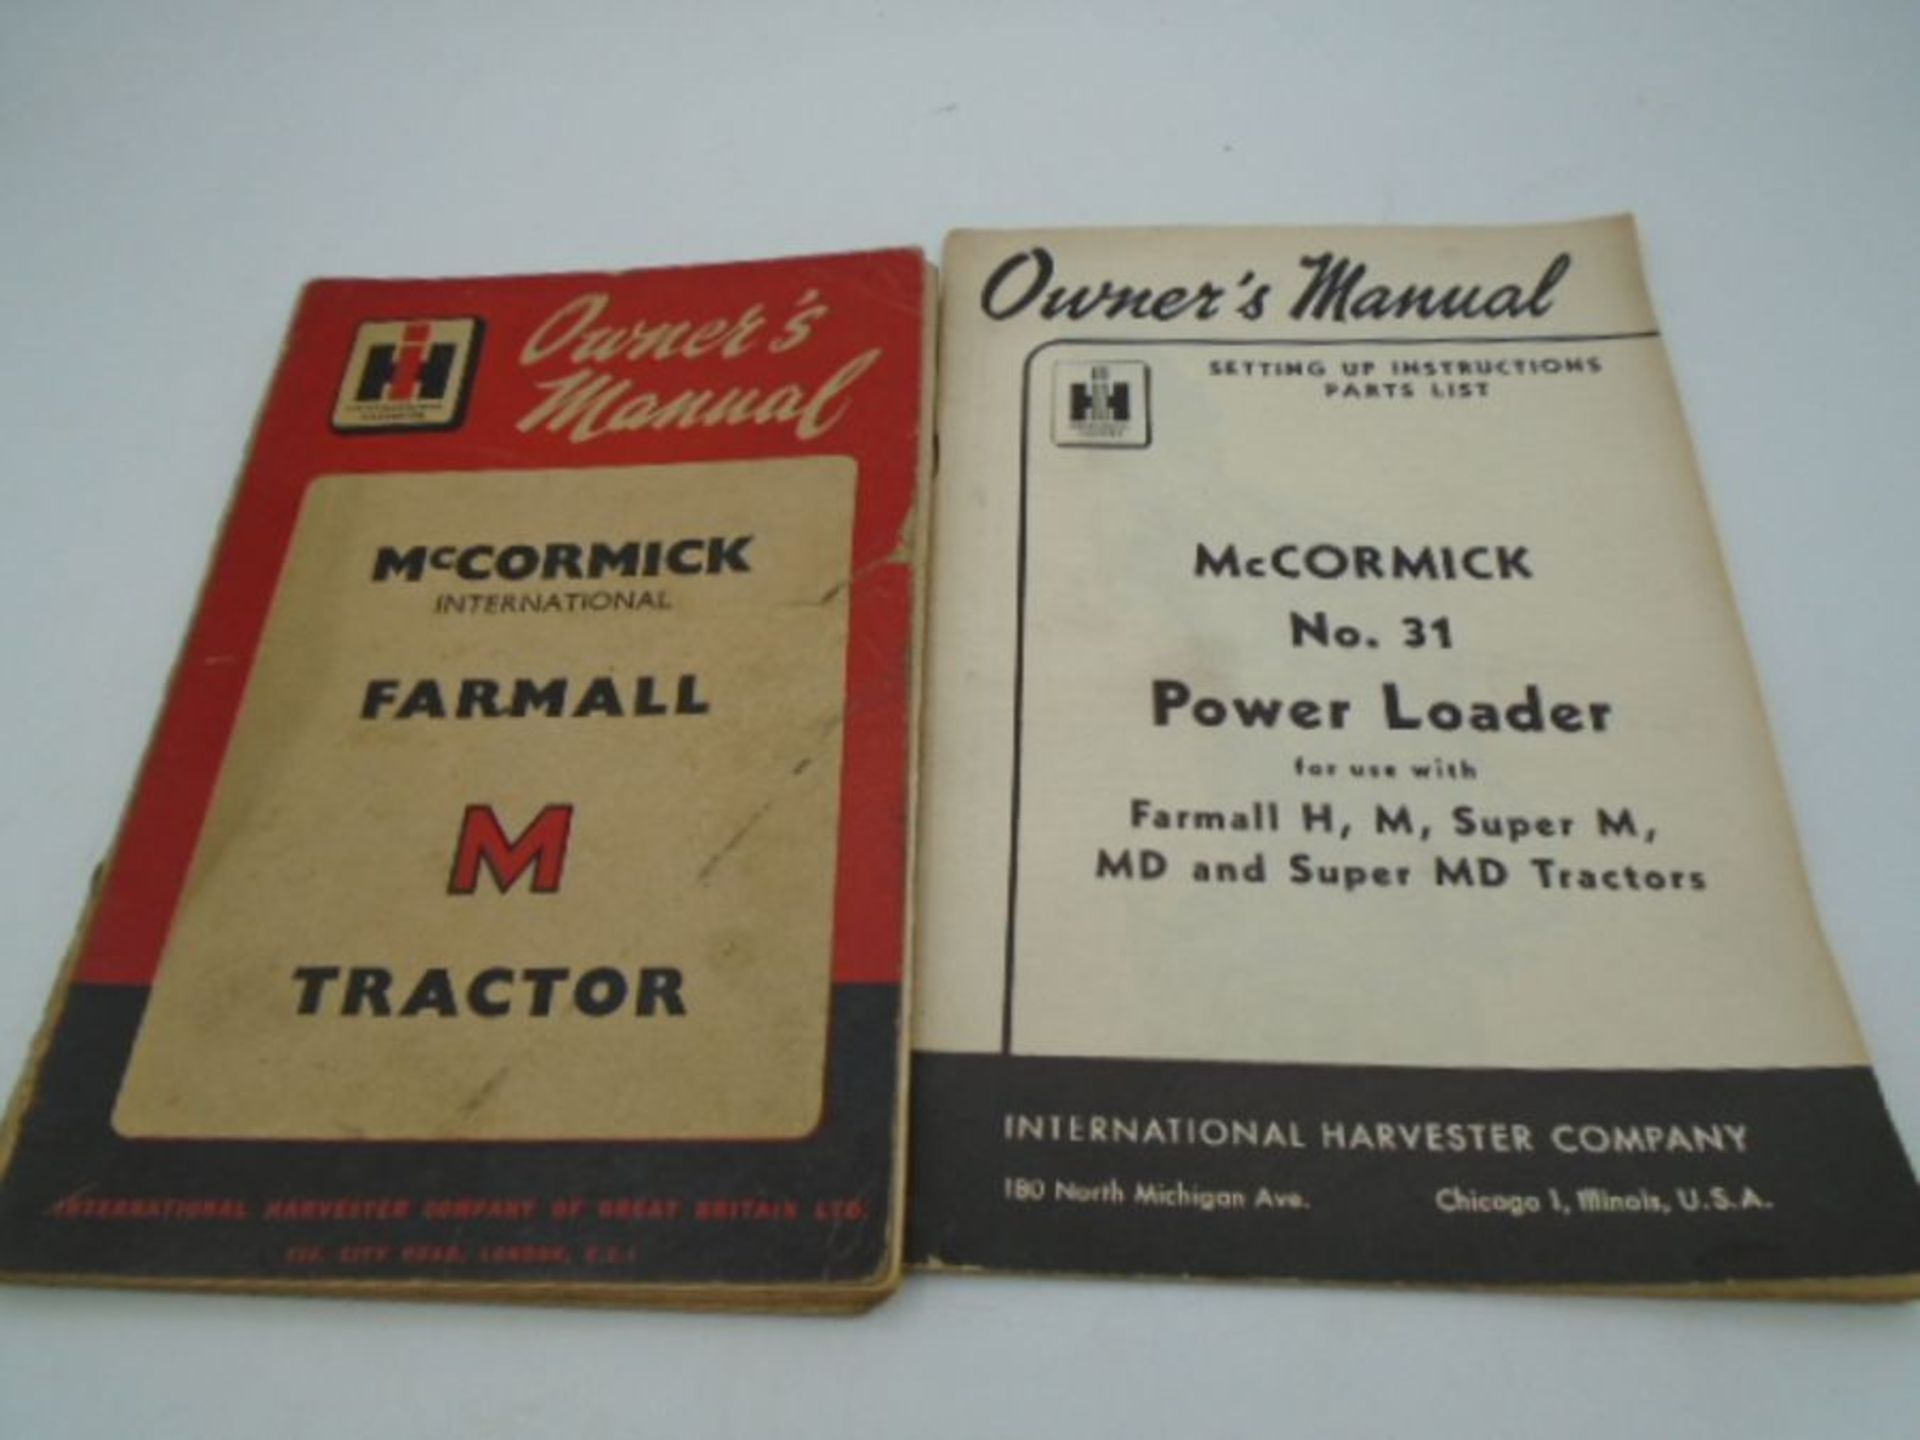 3 owners manuals - 'M' tractor plus 2 others - Image 4 of 4